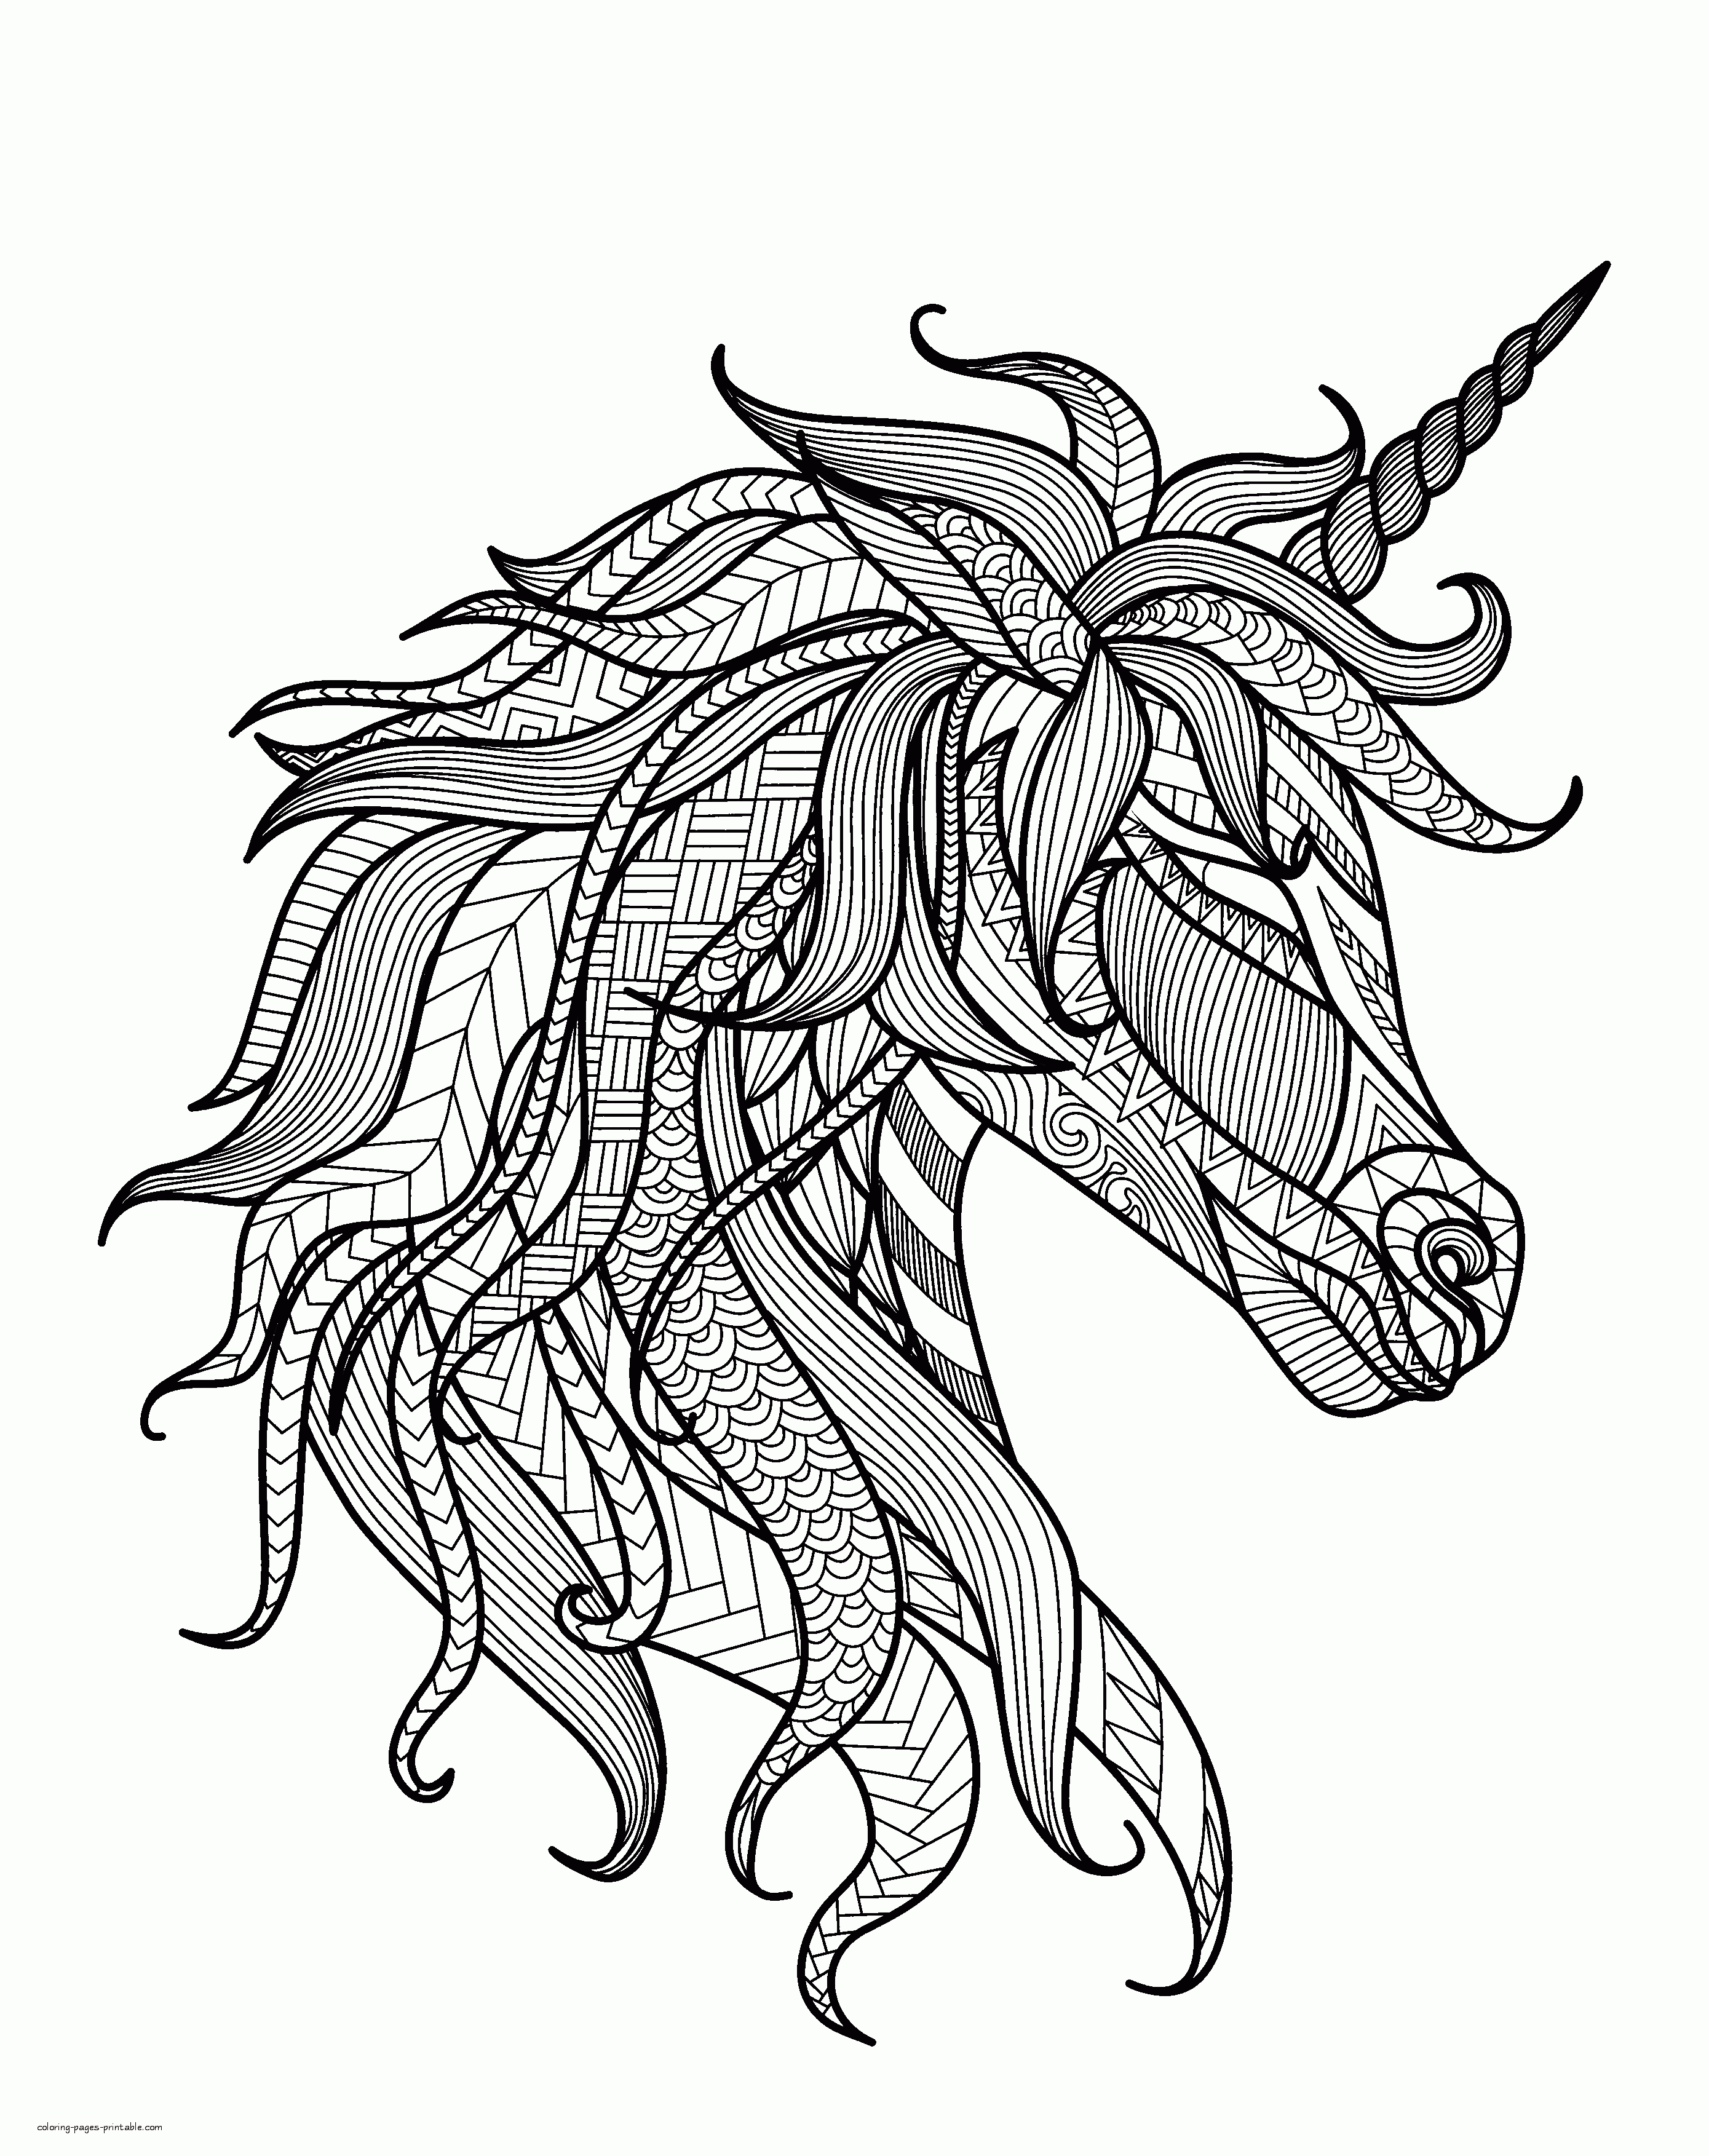 Unicorn Coloring Page For Adults    COLORING PAGES PRINTABLE.COM ...